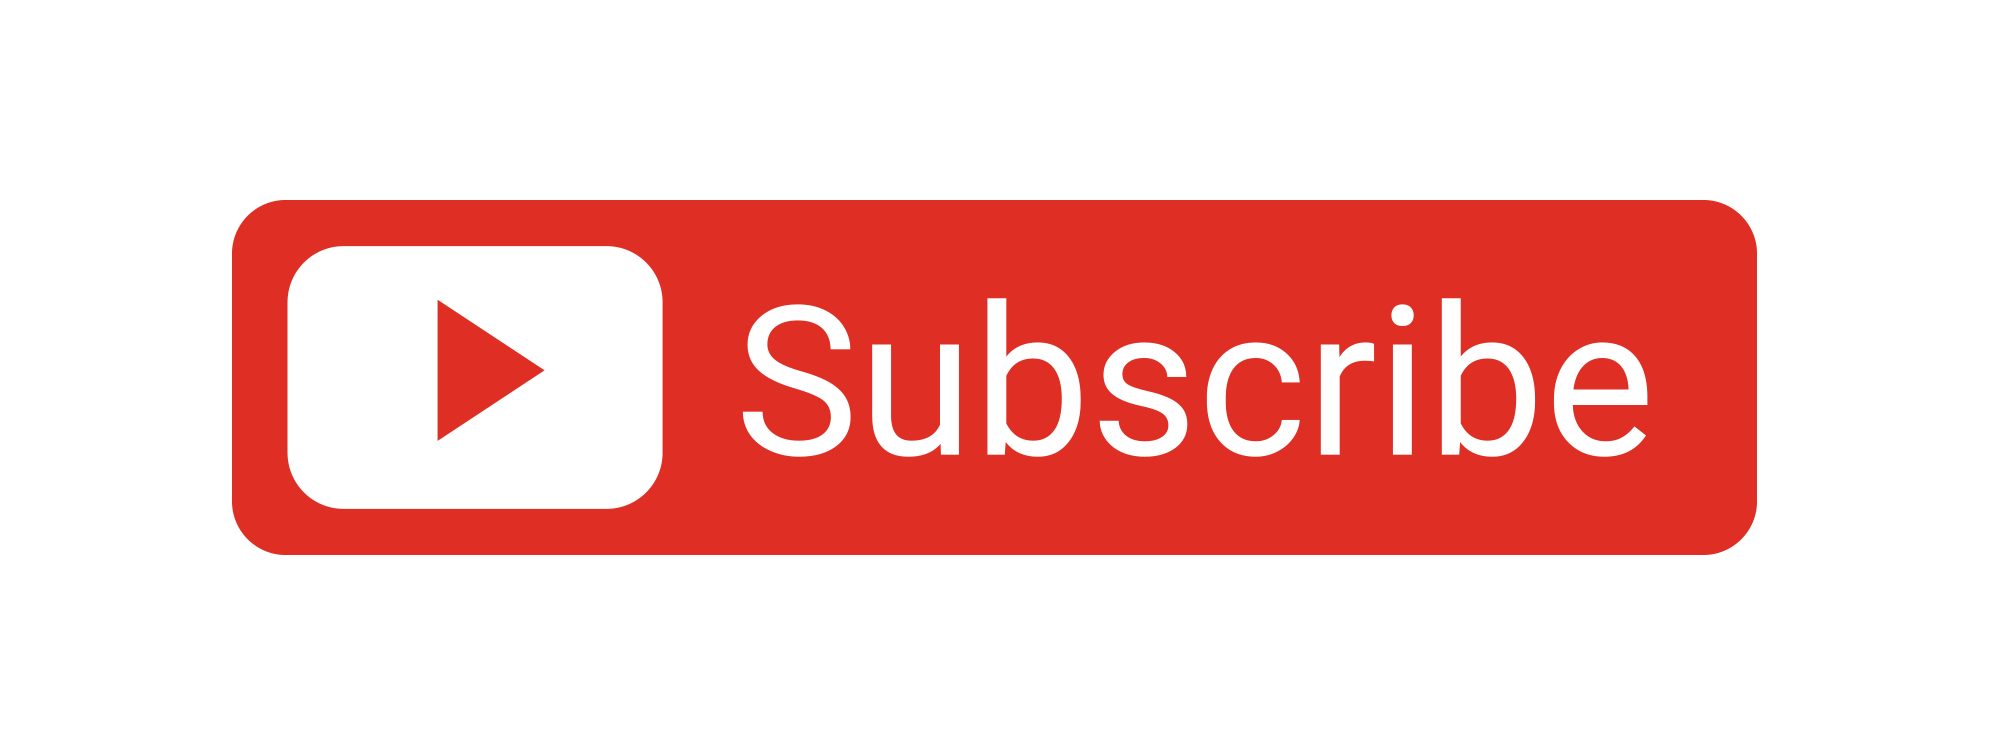 Youtube Subscribe Button Png Image Transparent Png Arts Images My Xxx